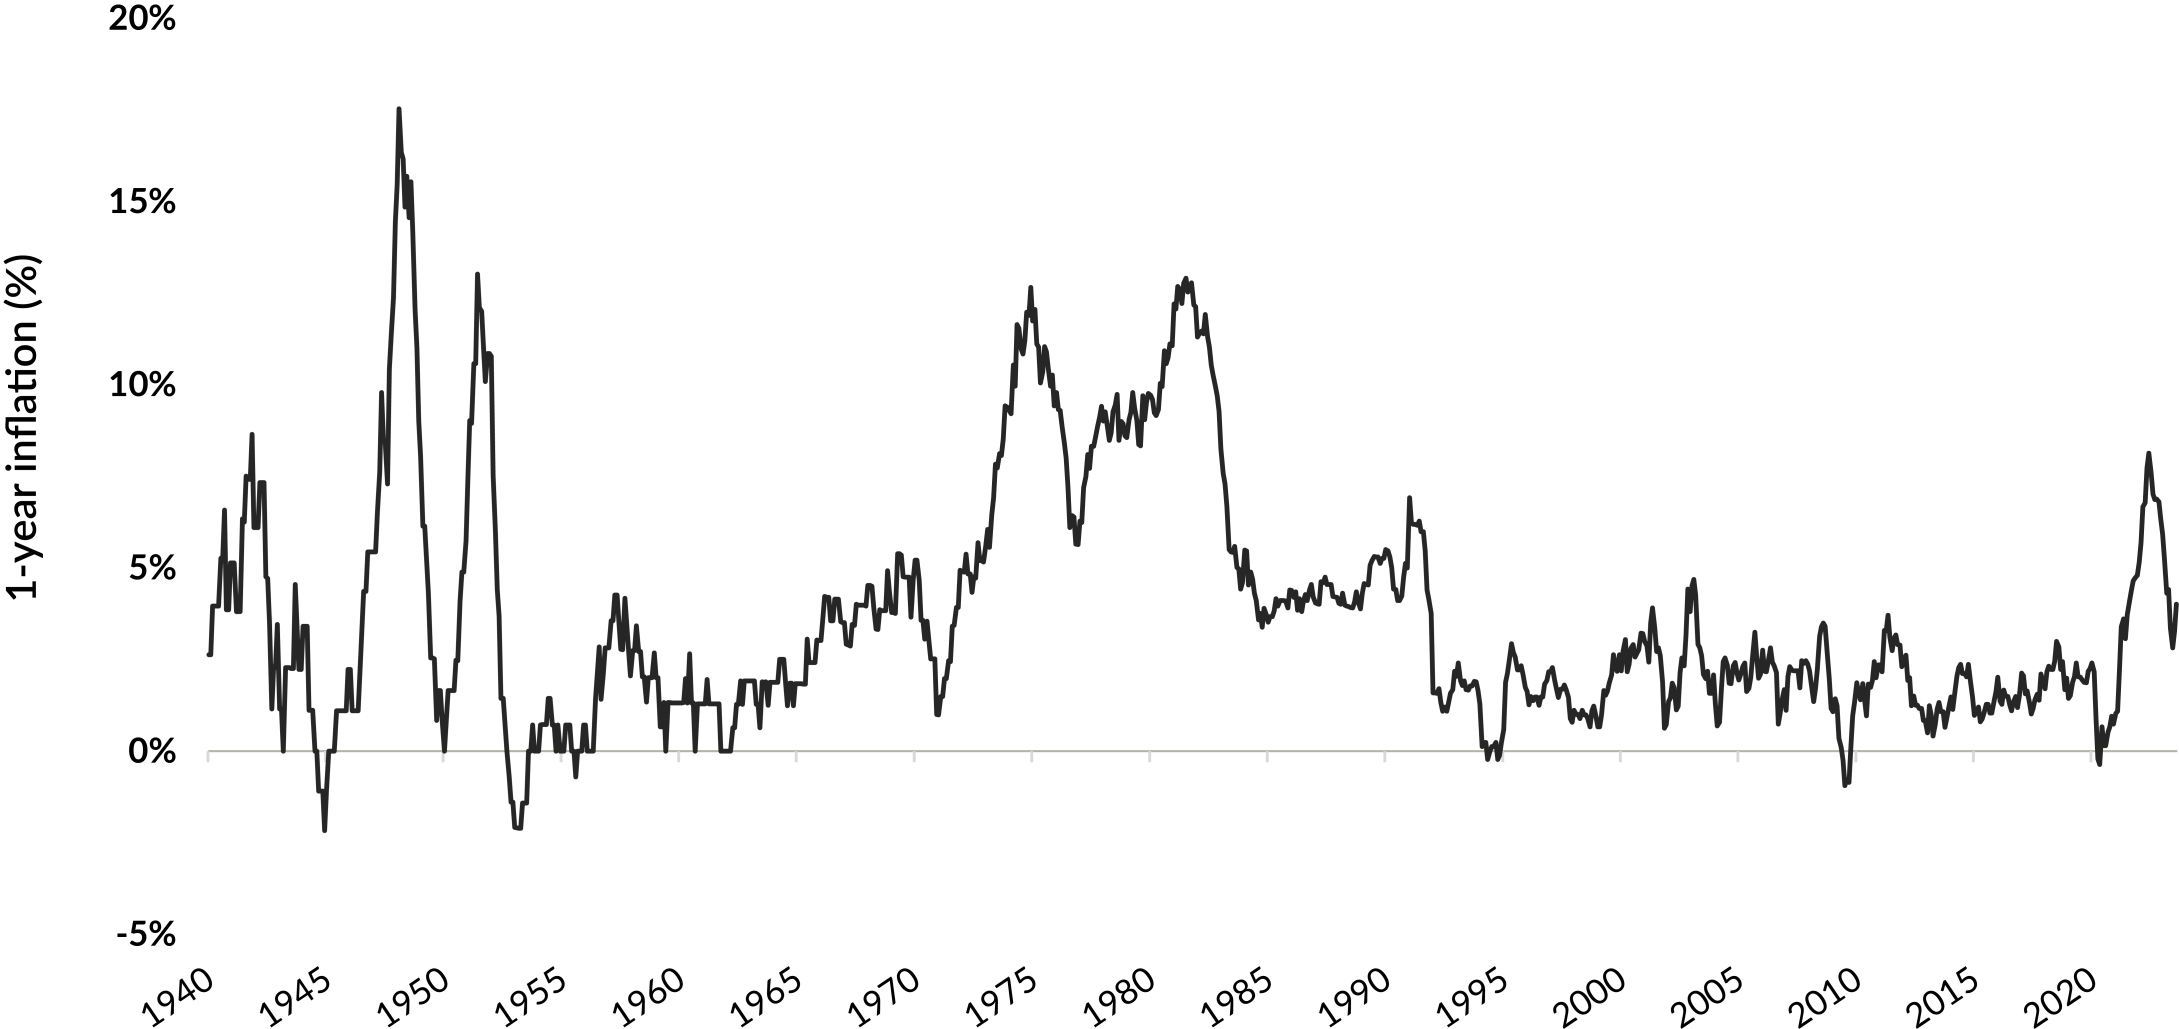 A line chart showing rolling 1-year Canadian inflation between December 31, 1939 and August 31, 2023. Inflation was high post-World War 2 and in the 1970s and 1980s before dropping to under 5% between the early 1990s to the 2020. It rose to around 8%, but has since dropped again.